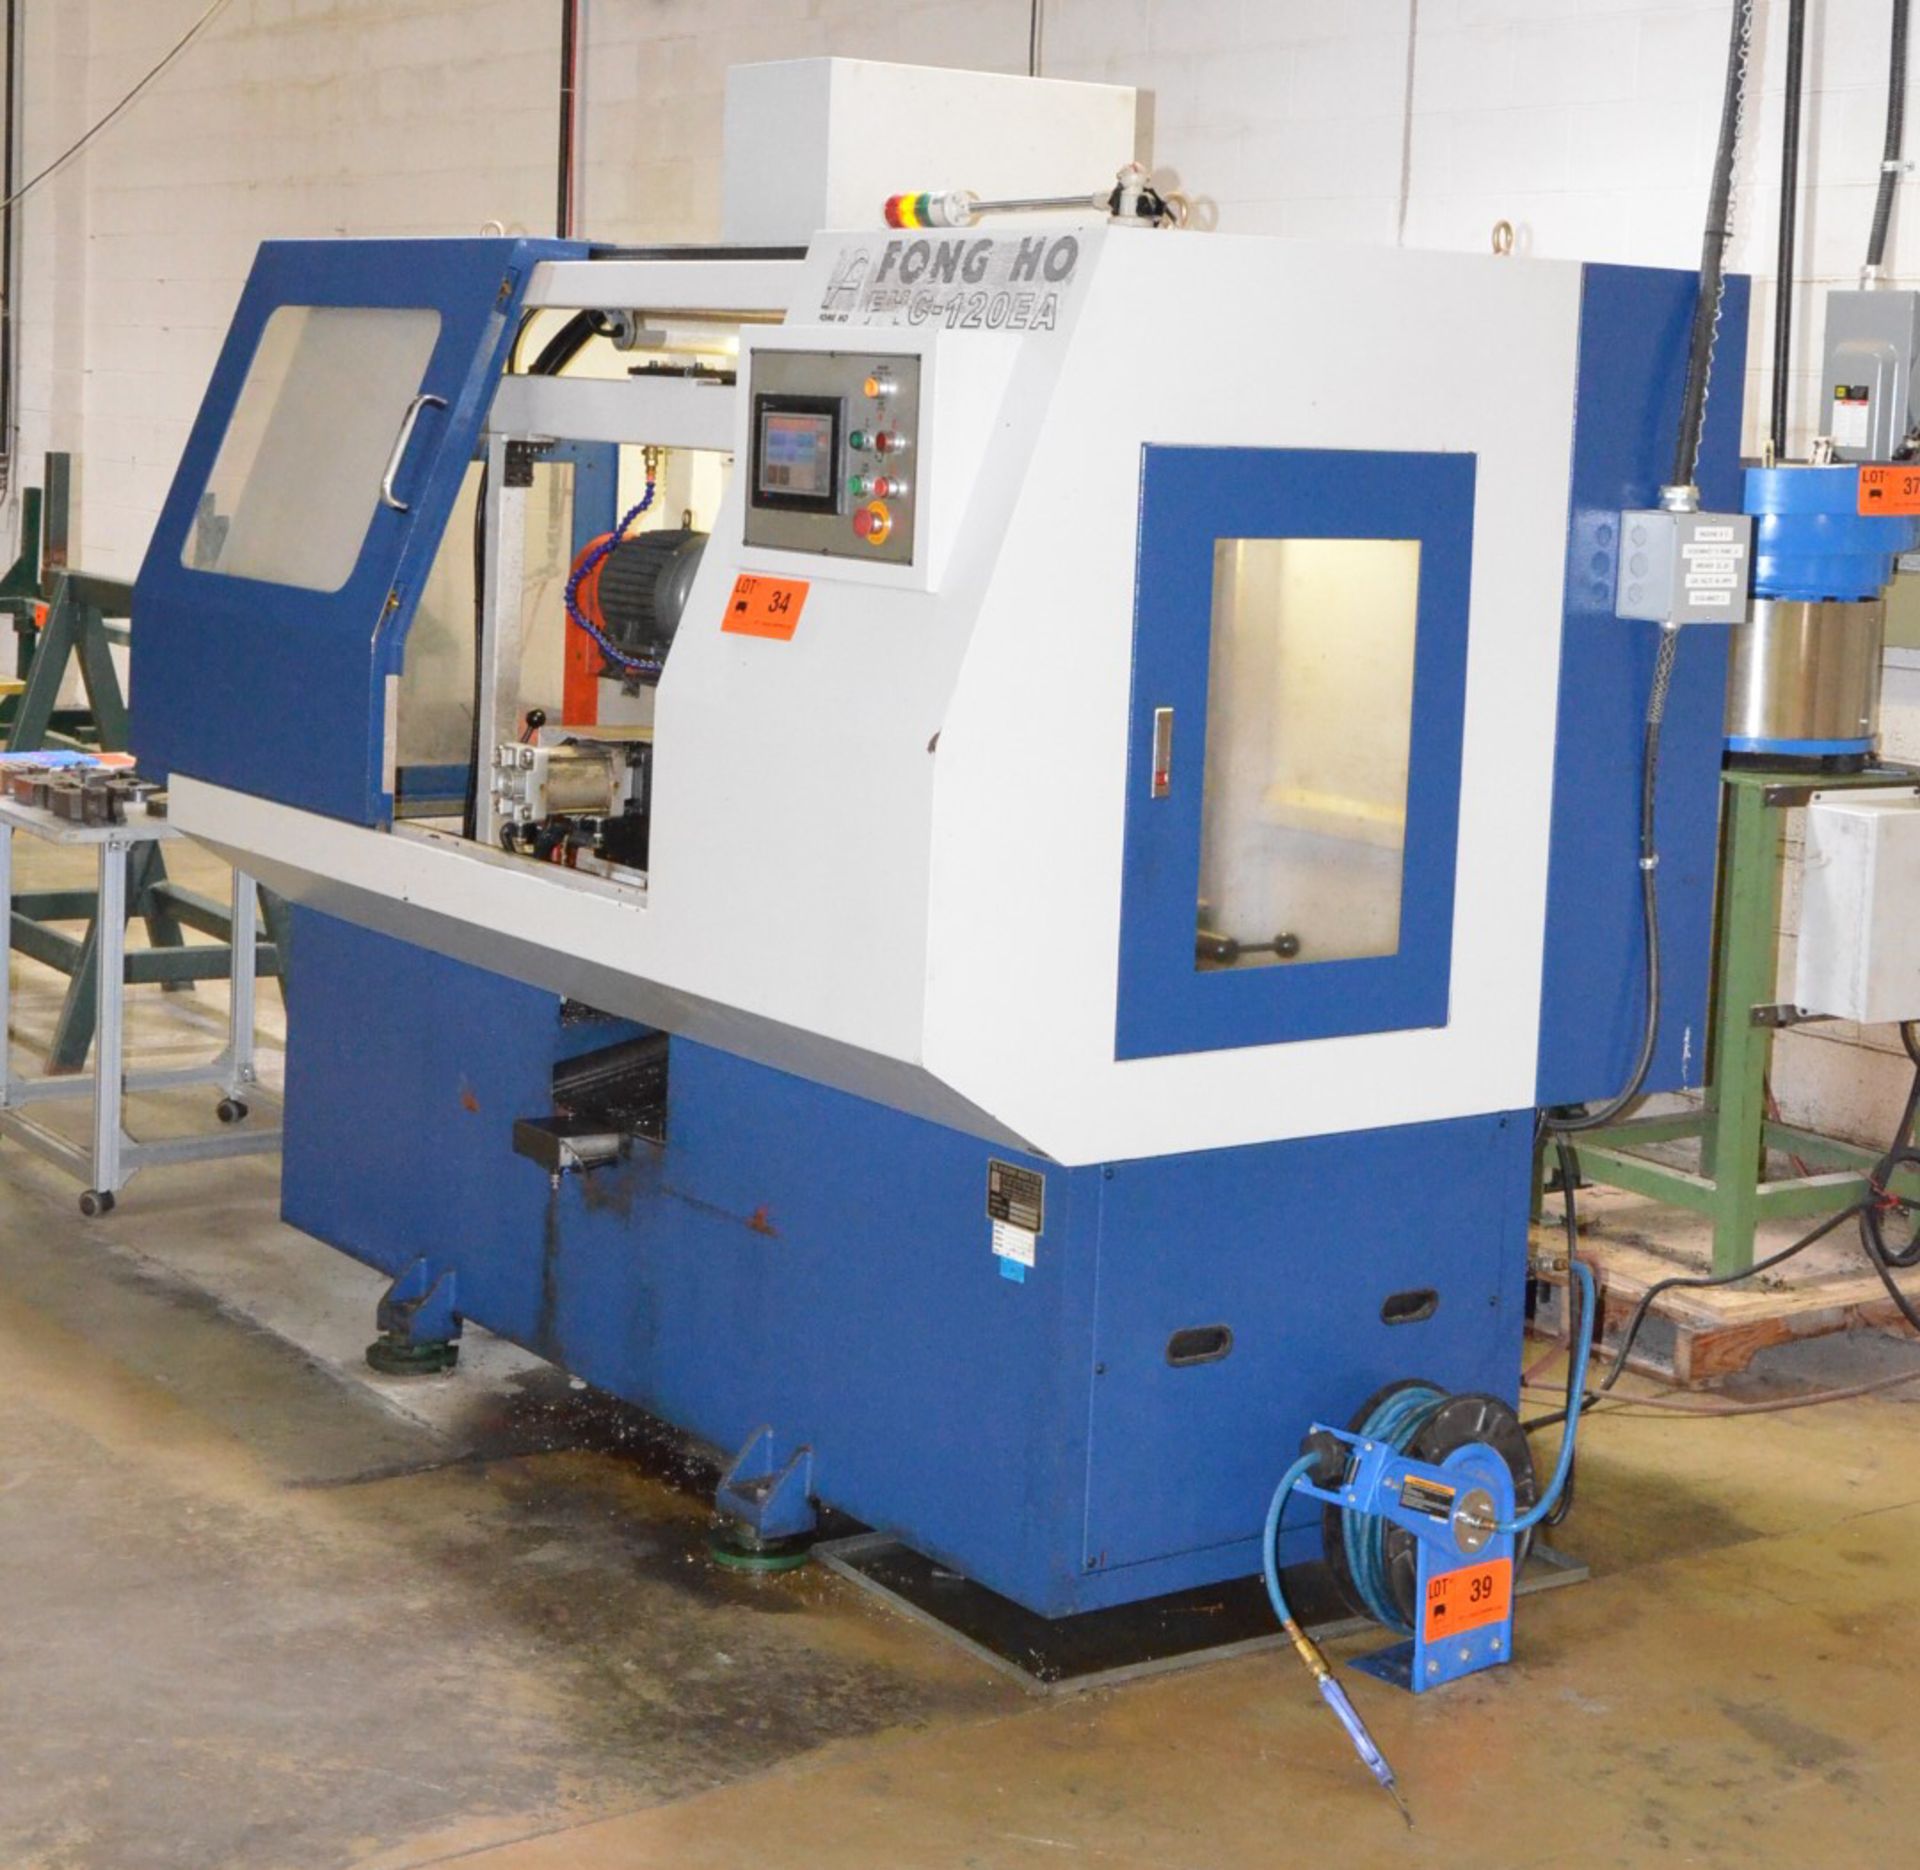 FH MACHINERY (2013) FHC-120EA CNC AUTOMATIC OPPOSING SPINDLE CHAMFERING MACHINE WITH SHIHLIN EA-12 - Image 7 of 19